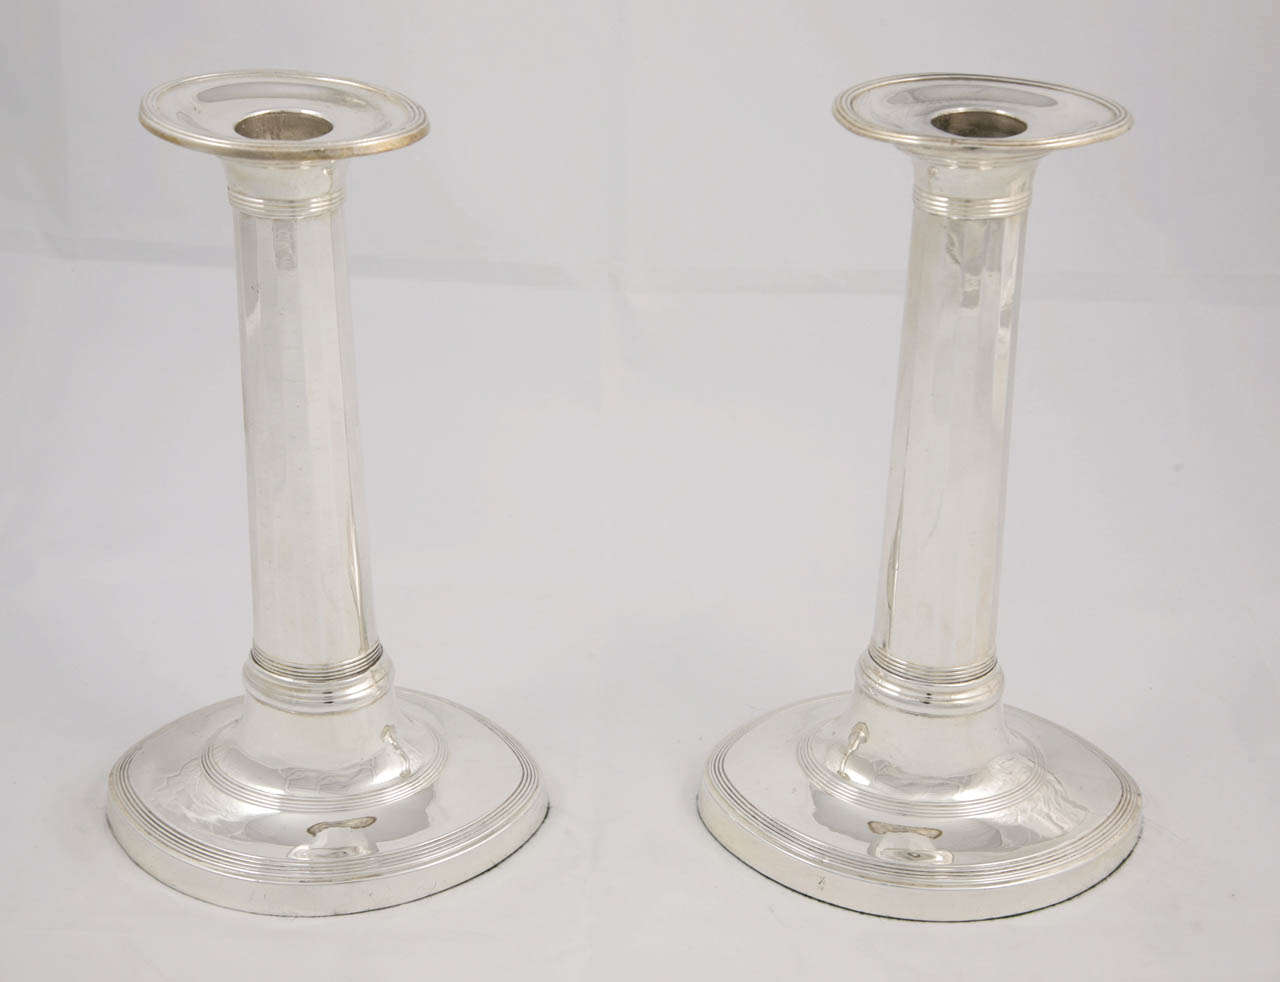 Pair of oval based early sheffield plate candlesticks c.1790 (Replated)